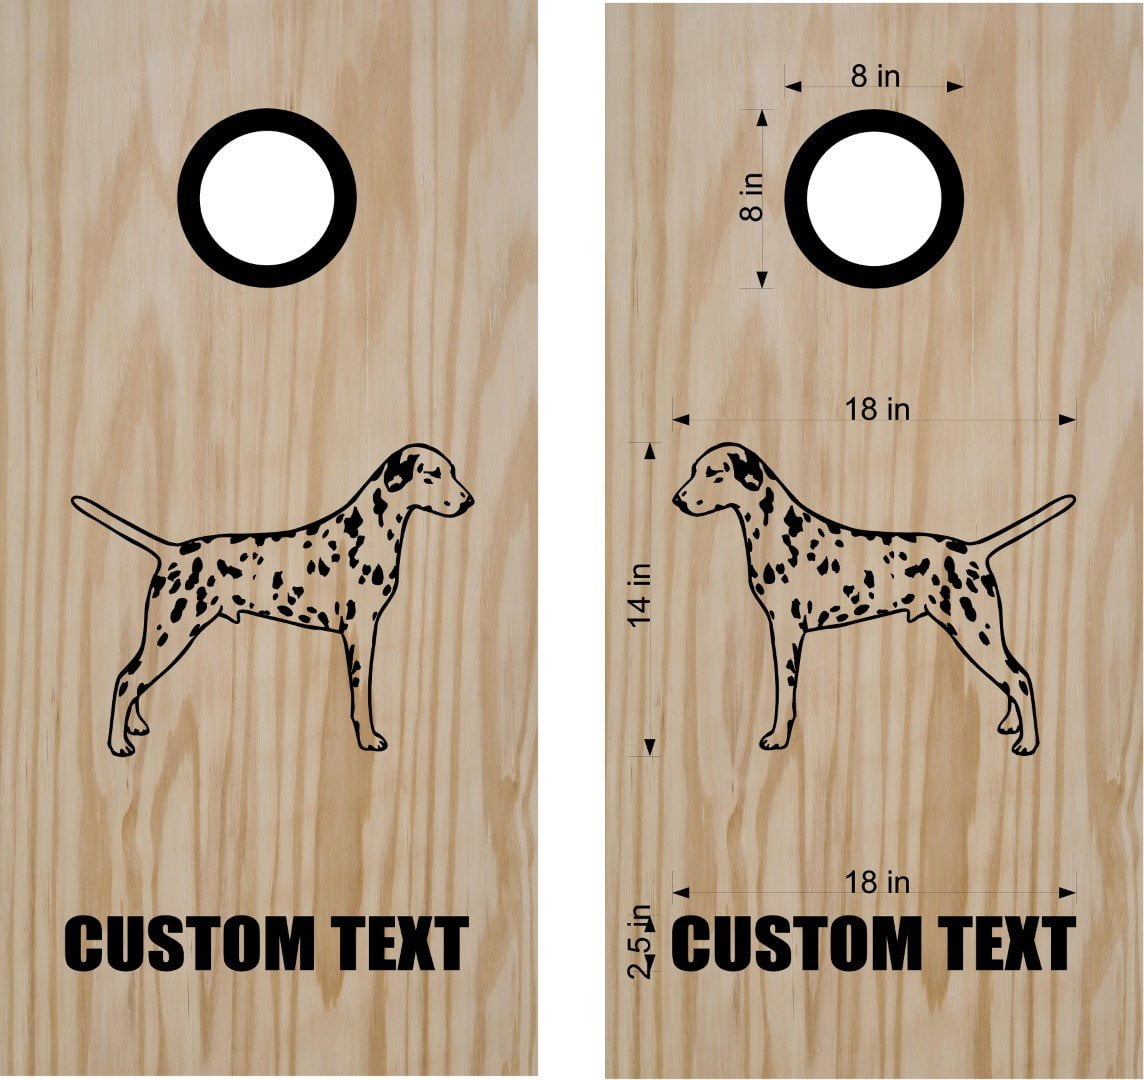 VINYL WRAPS Cornhole Boards DECALS Puppy and Kitten BagToss Game Stickers 414 